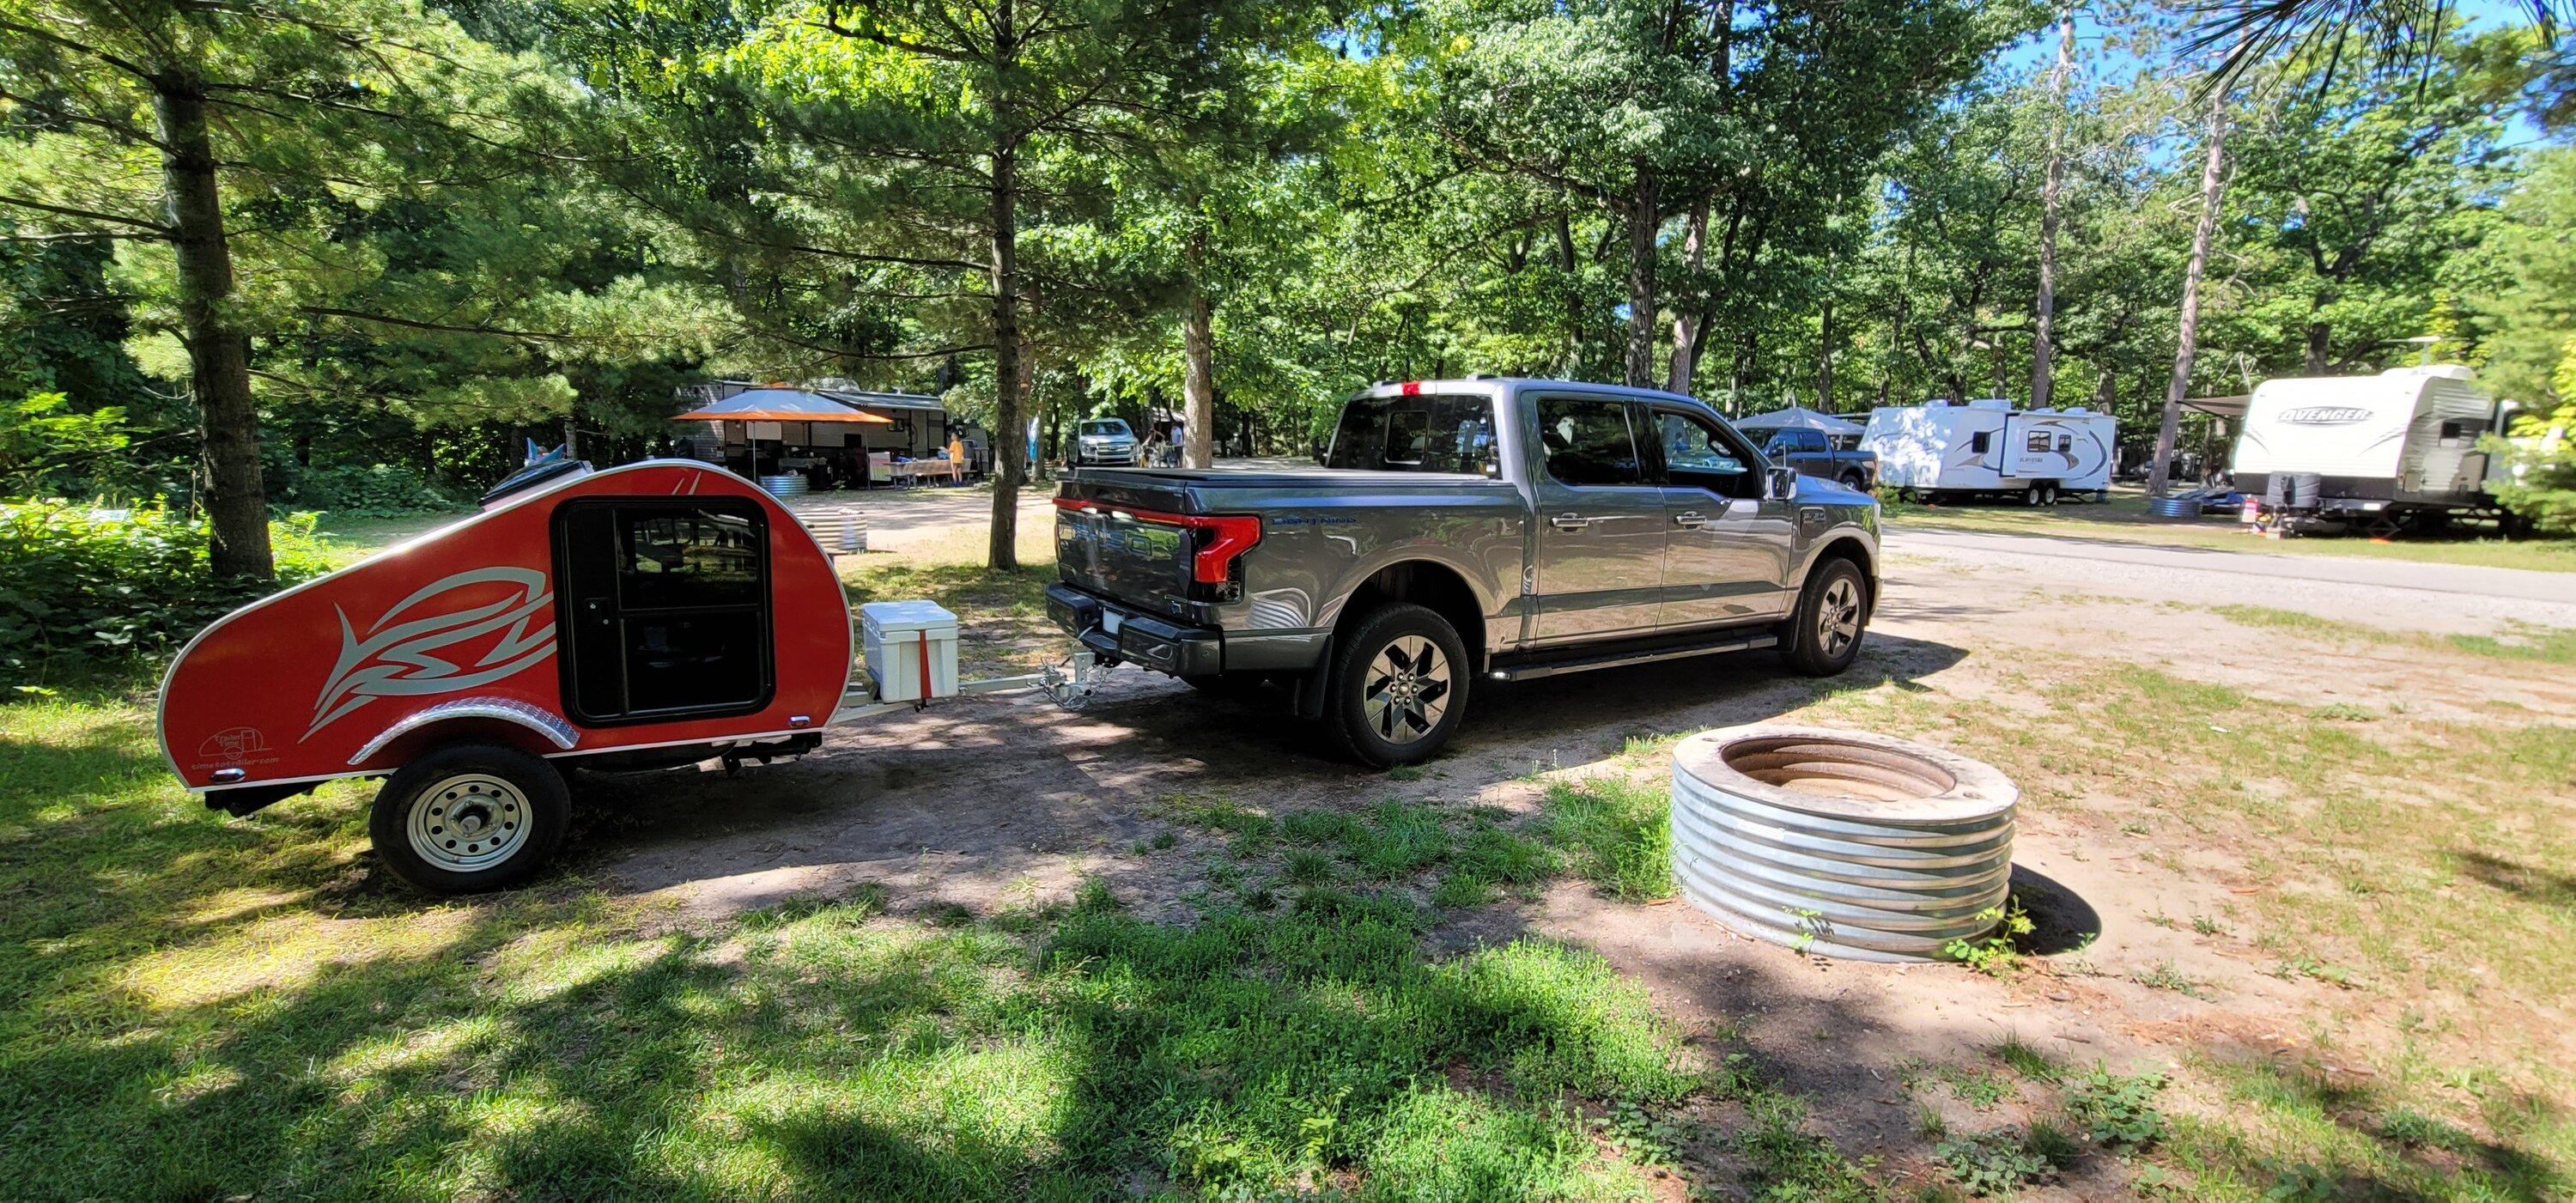 Ford F-150 Lightning Went camping with a tiny trailer 20230730_113221